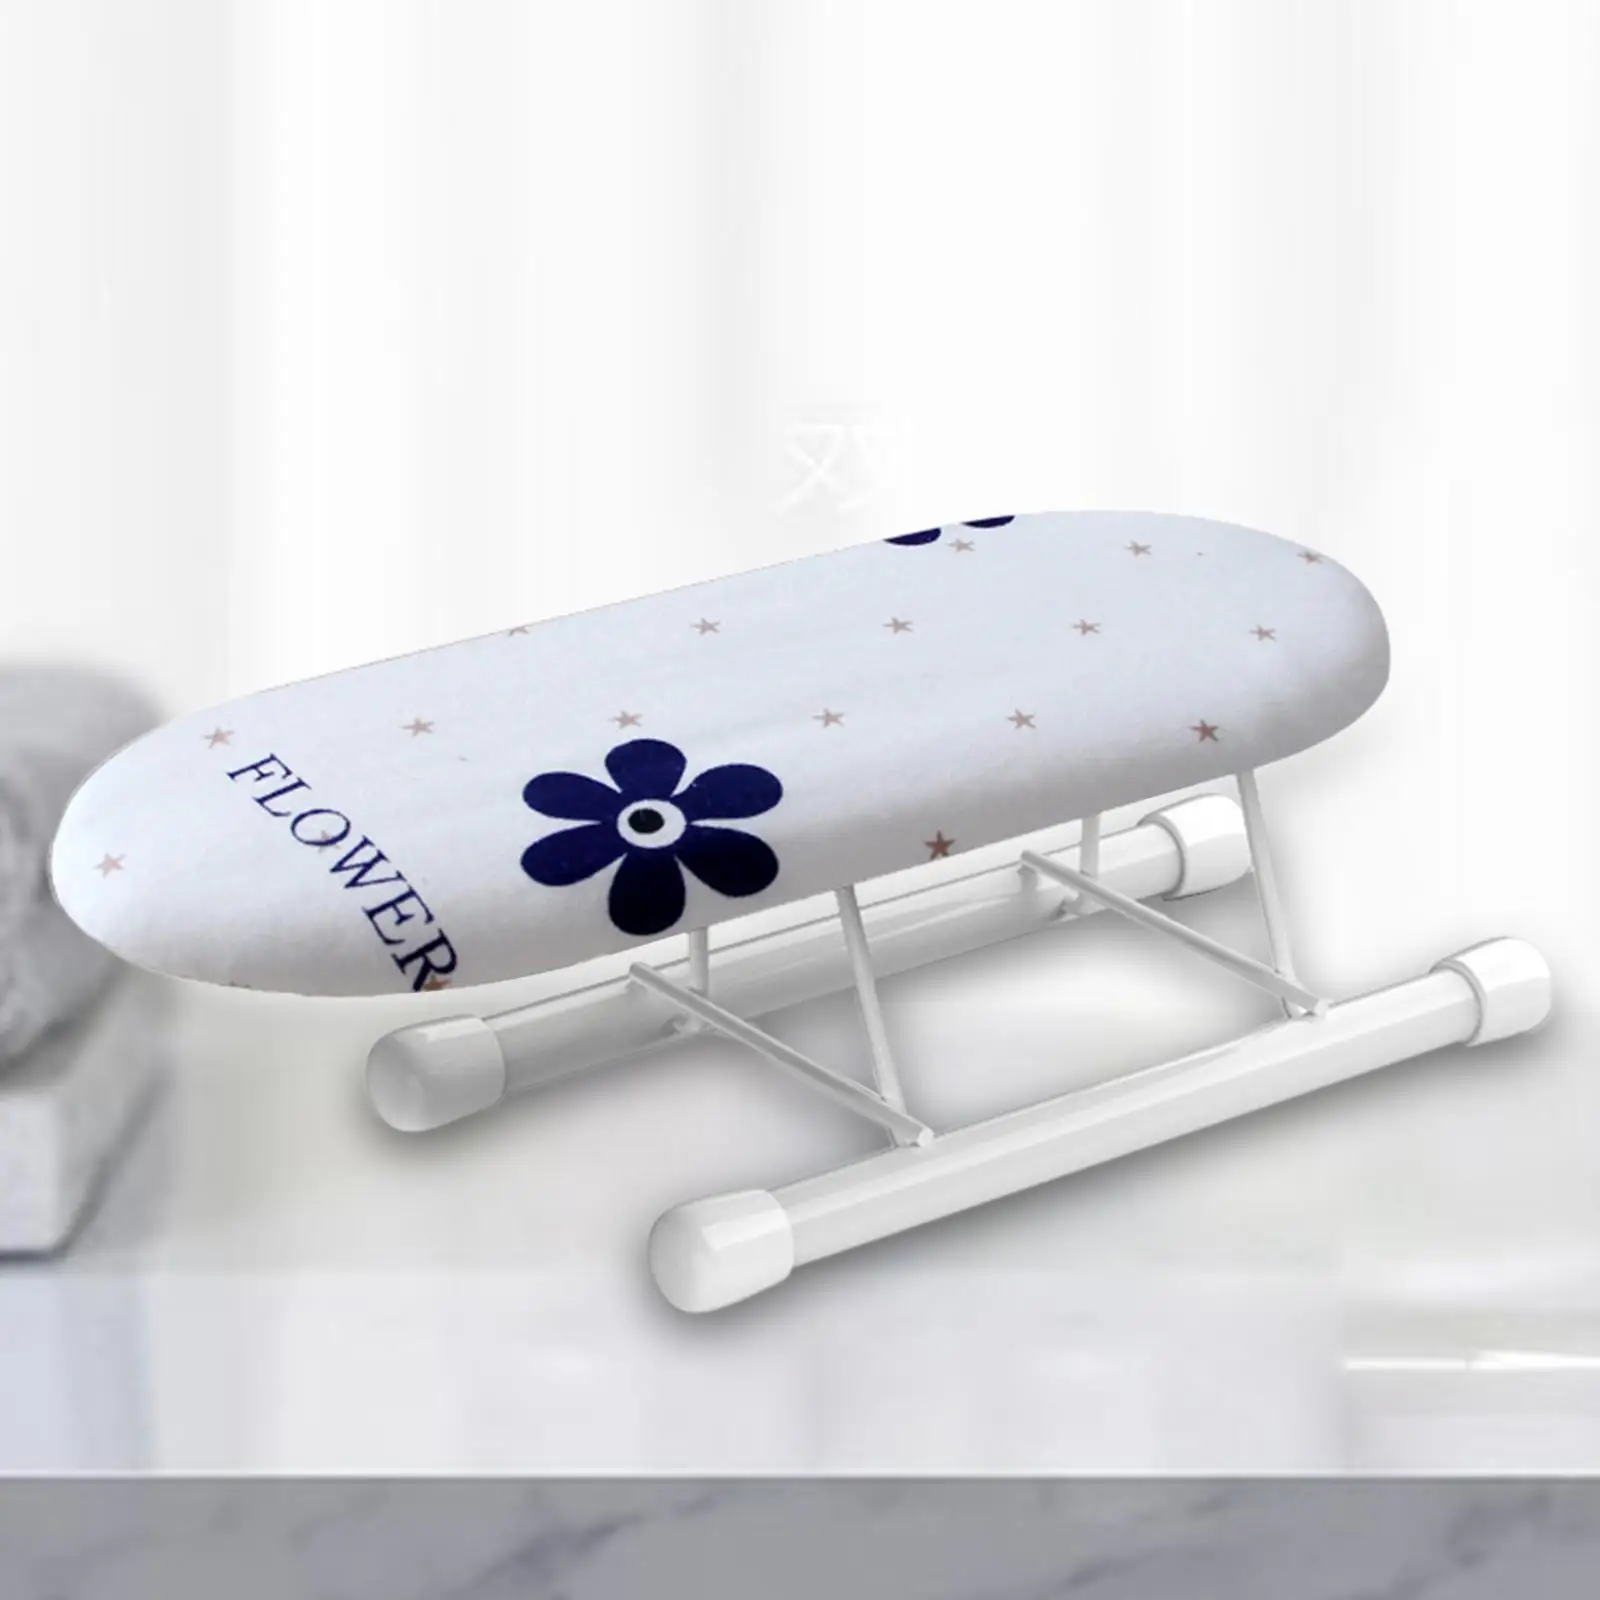 Steel Ironing Board with Folding Legs Heat Resistant Cover Weight Anti Slip for Laundry Household Room Travel Dorm